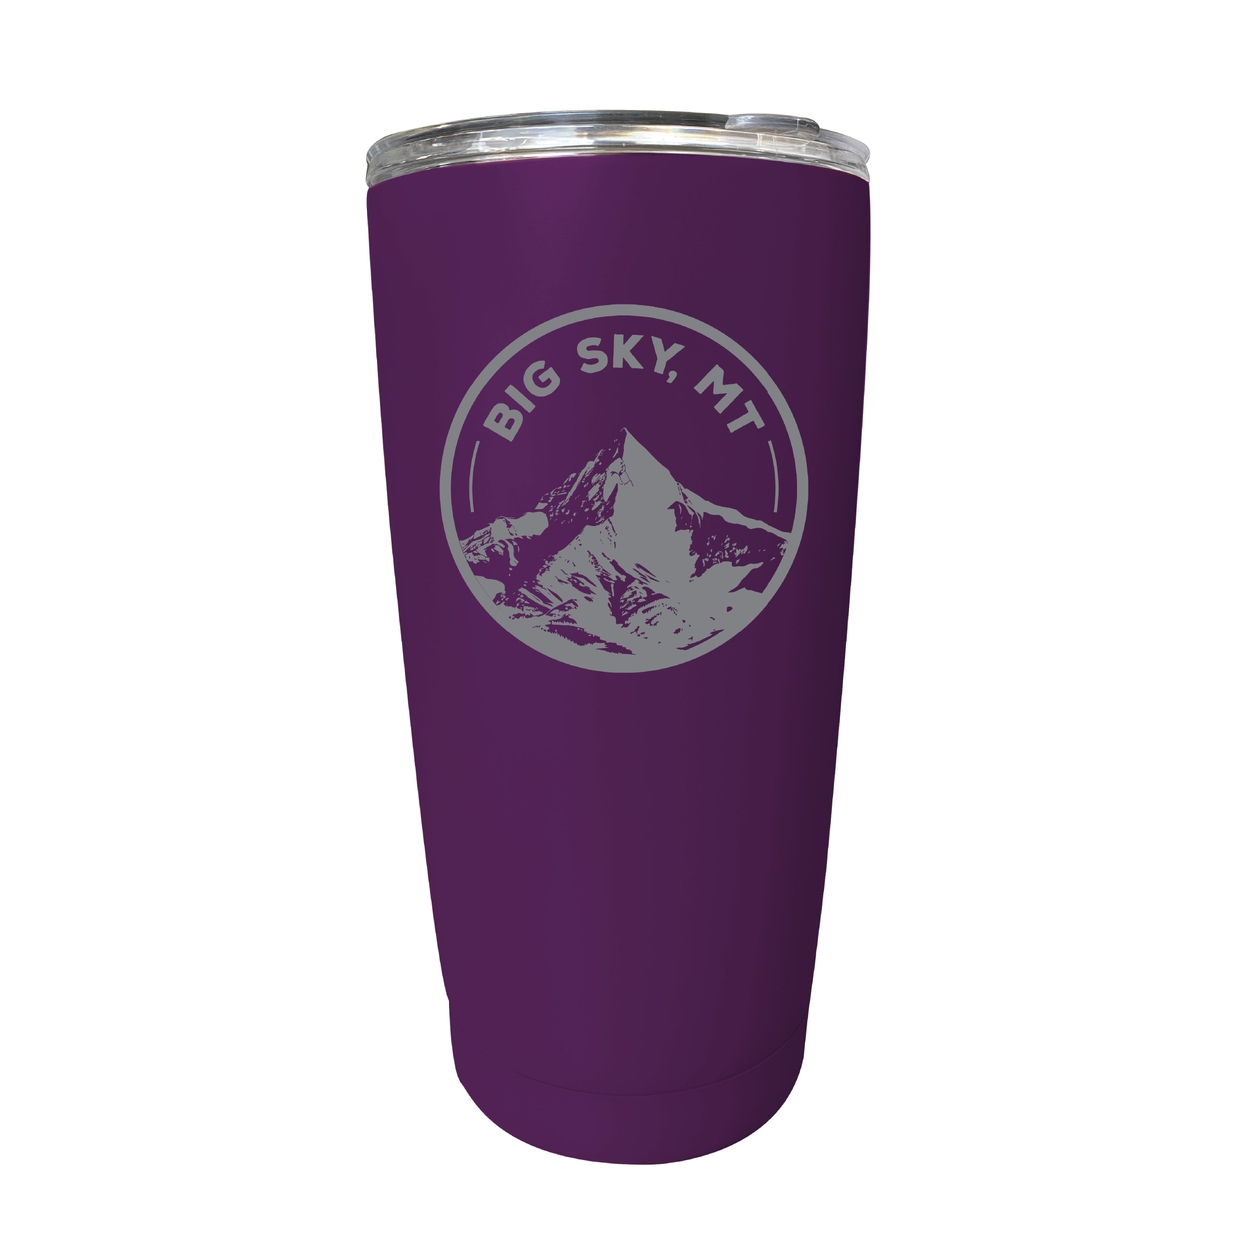 Big Sky Montana Souvenir 16 Oz Engraved Stainless Steel Insulated Tumbler - Navy,,4-Pack